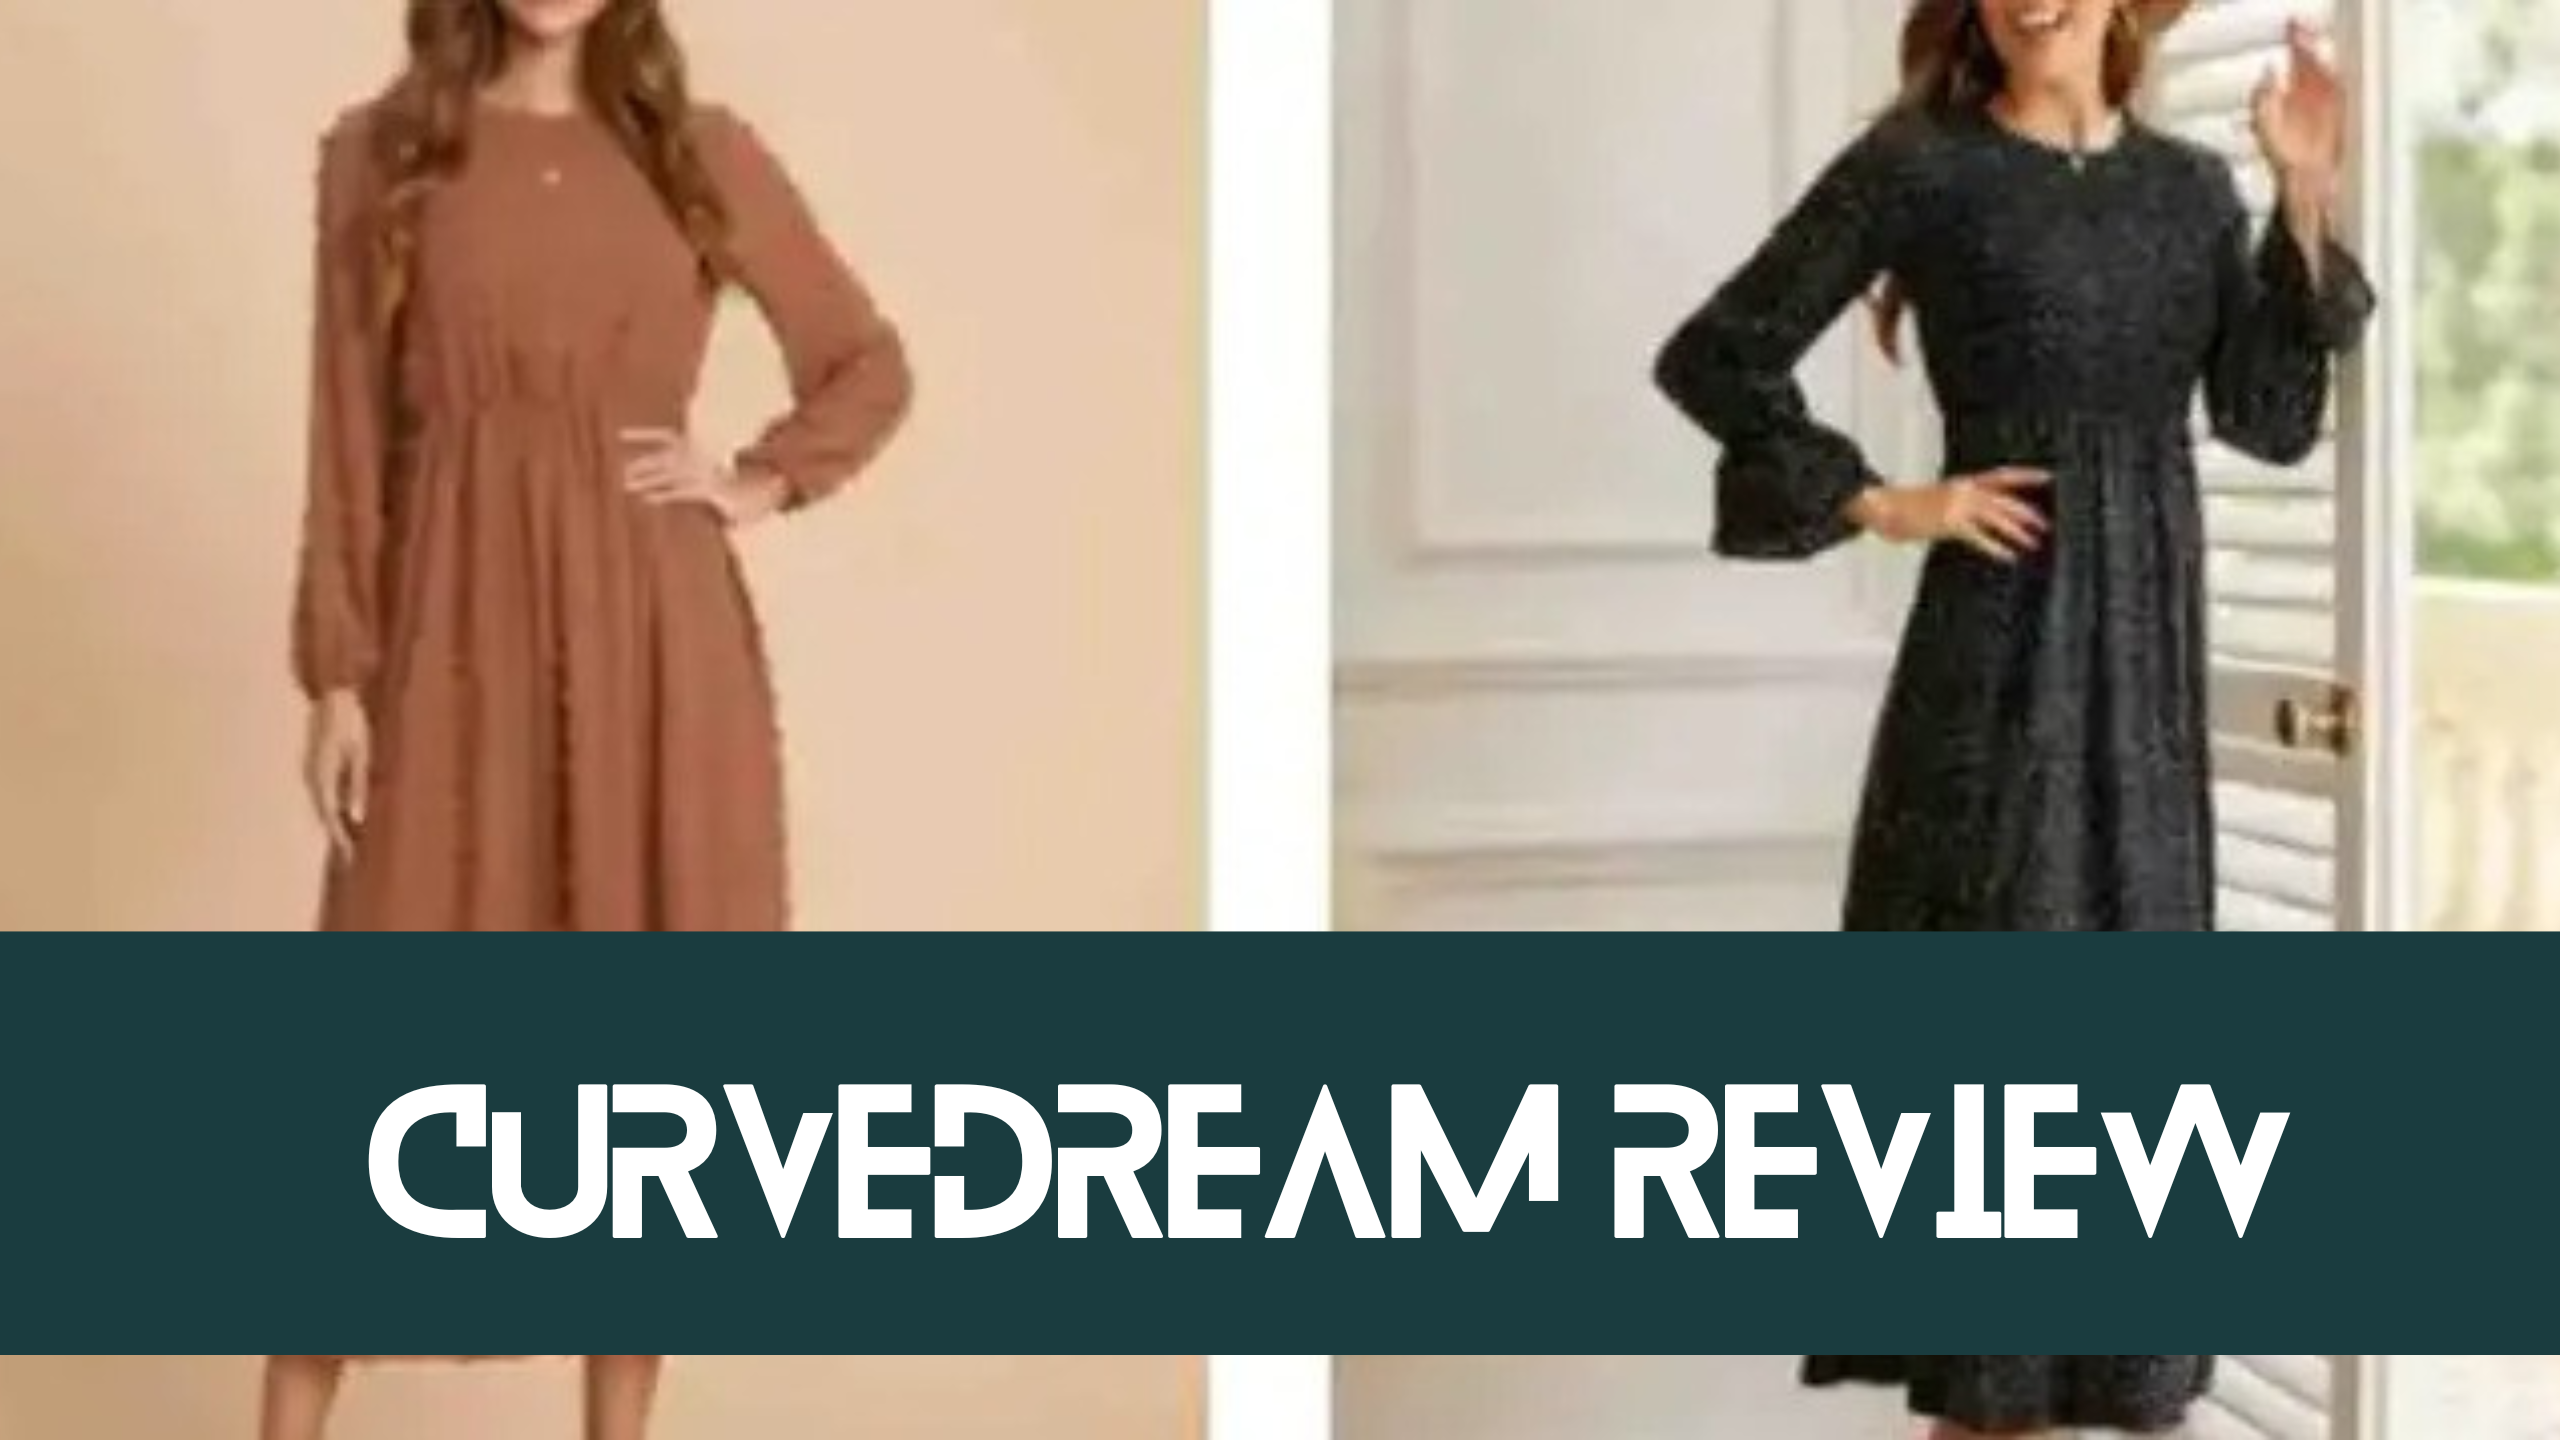 CurveDream Review